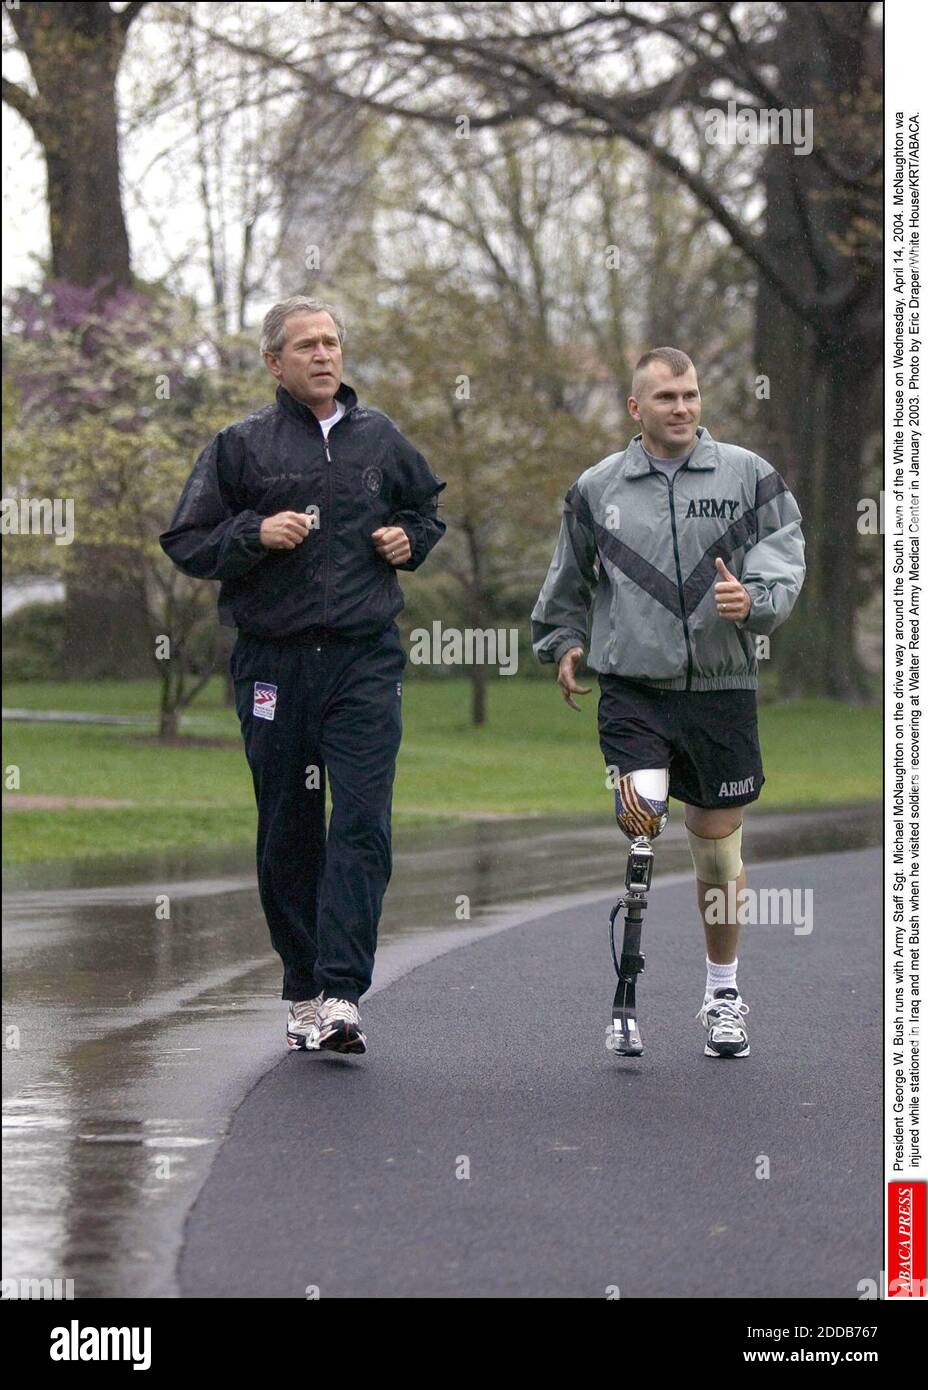 NO FILM, NO VIDEO, NO TV, NO DOCUMENTARY - President George W. Bush runs with Army Staff Sgt. Michael McNaughton on the drive way around the South Lawn of the White House on Wednesday, April 14, 2004. McNaughton wa injured while stationed in Iraq and met Bush when he visited soldiers recovering at Walter Reed Army Medical Center in January 2003. Photo by Eric Draper/White House/KRT/ABACA. Stock Photo